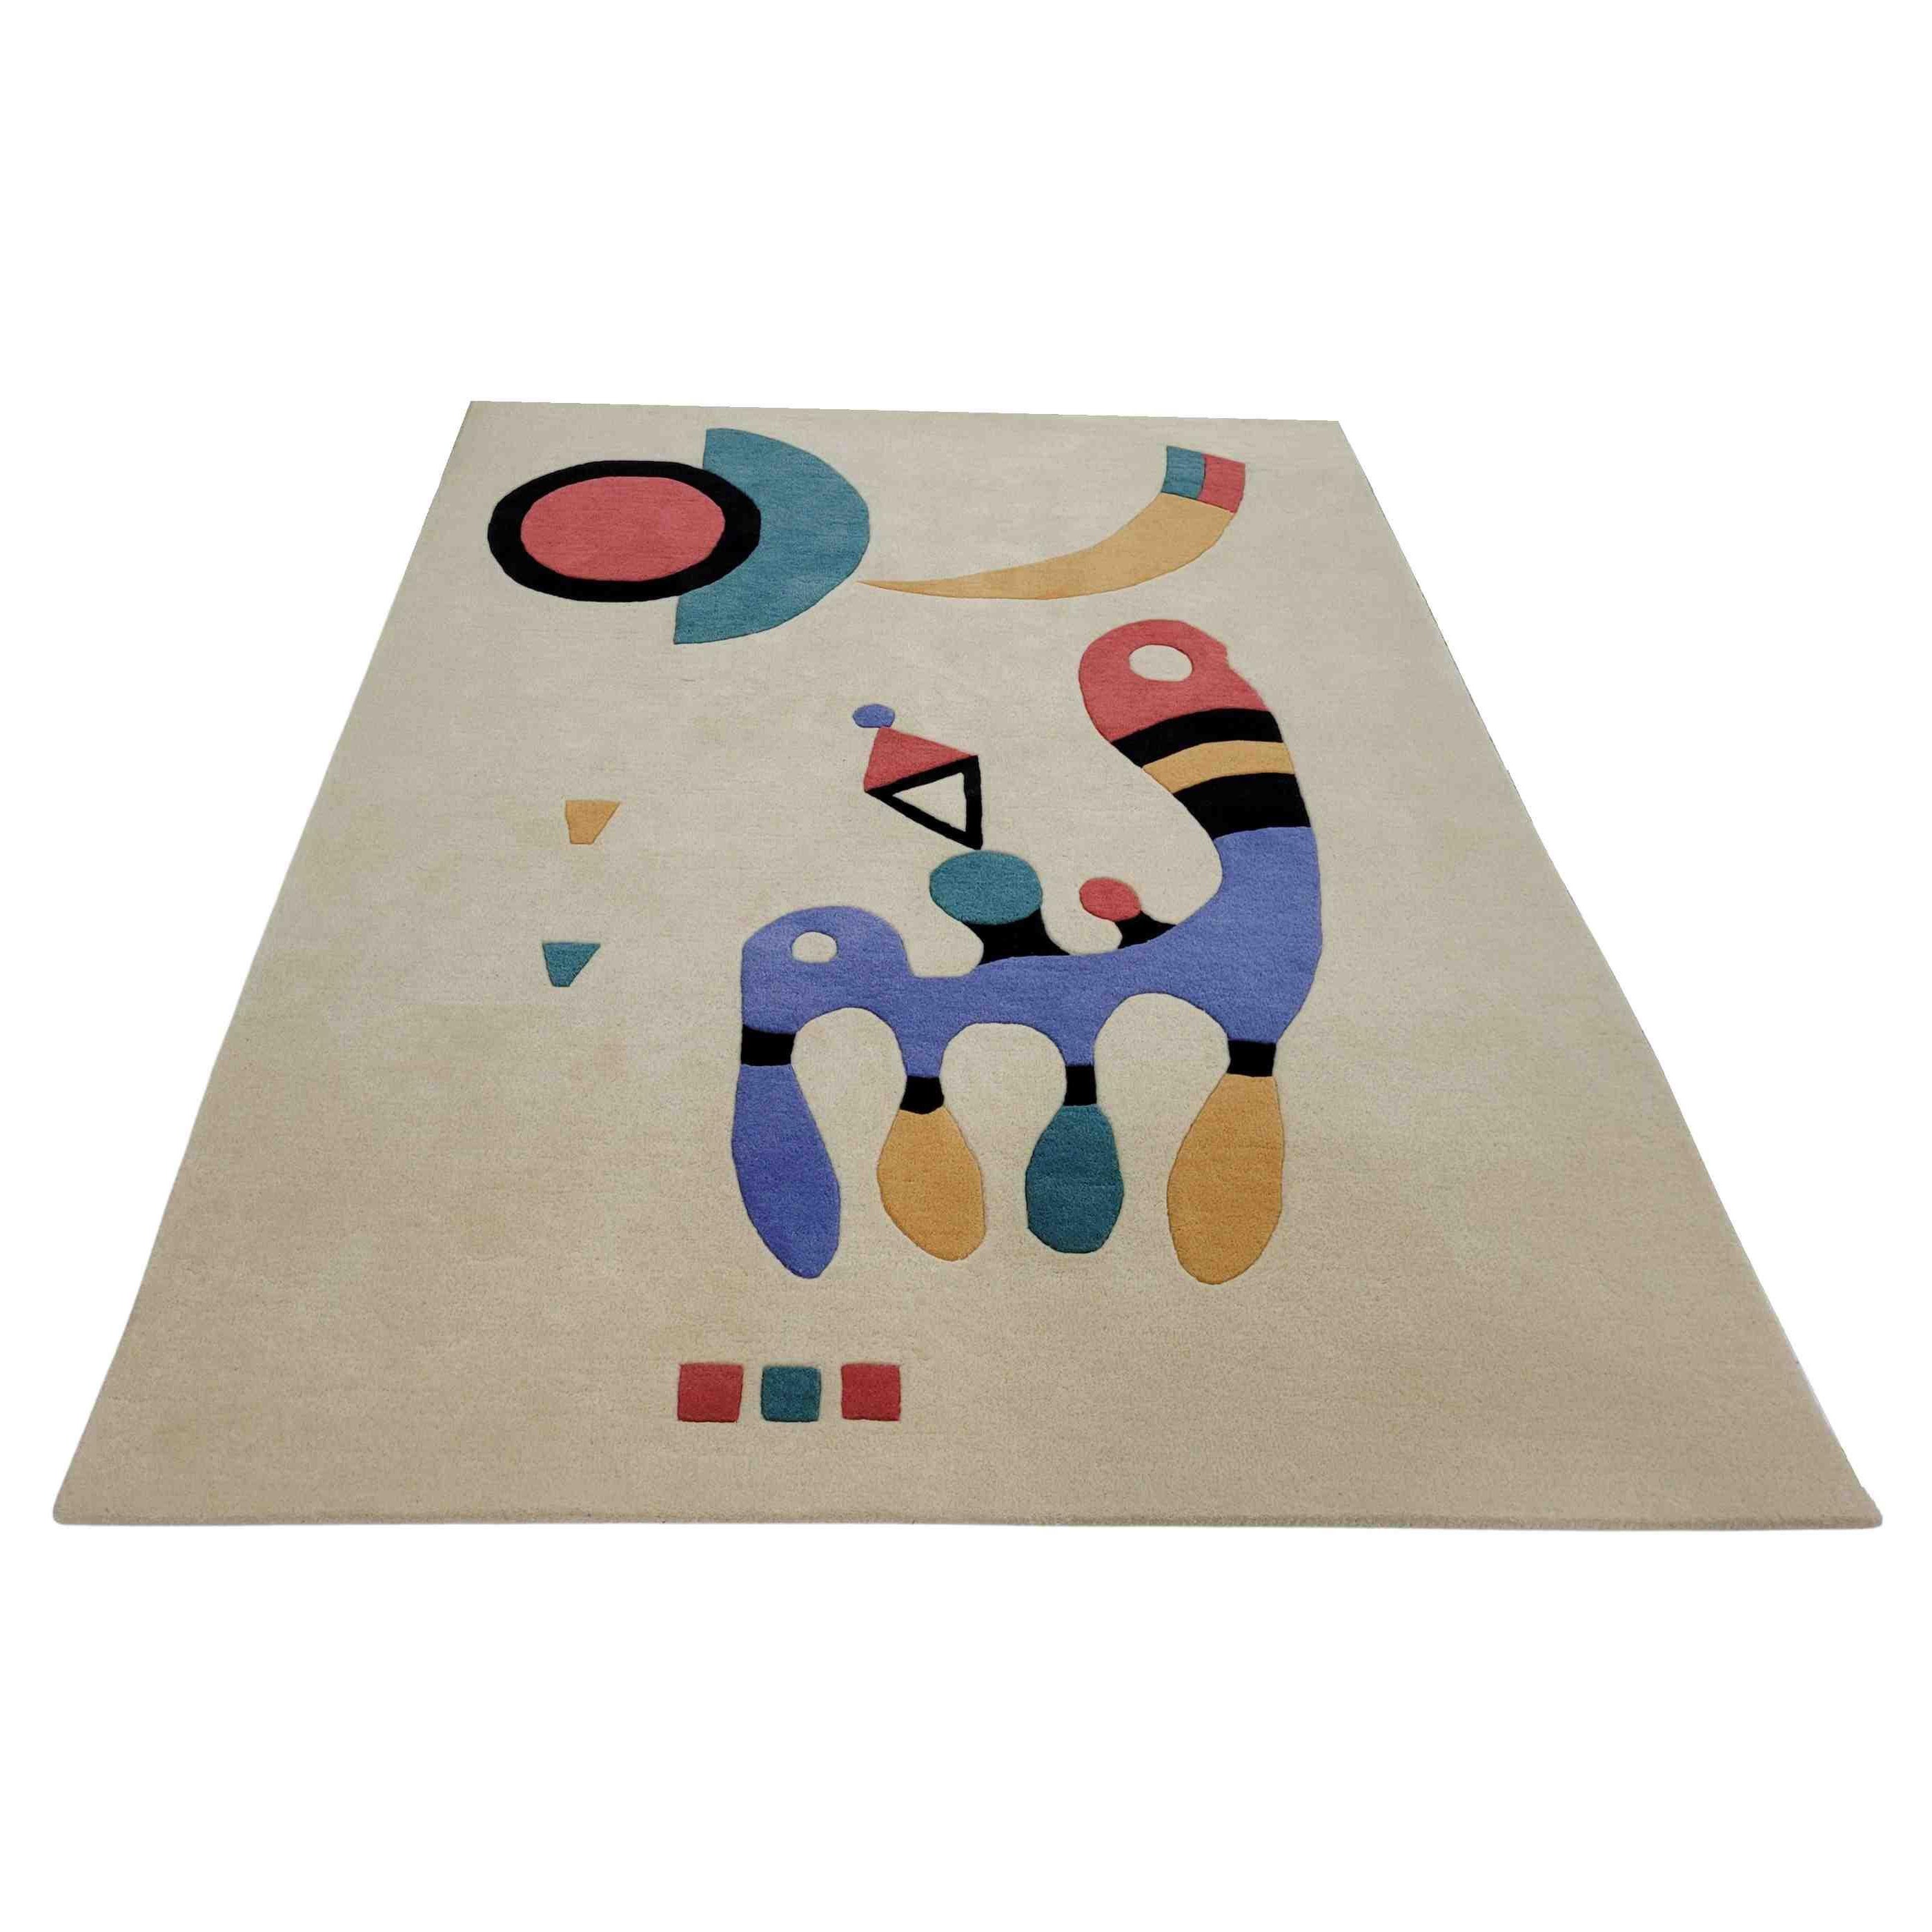 Custom Hand Tufted Rug, after Wassily Kandinsky “Composition” (1944) Limited Ed. For Sale